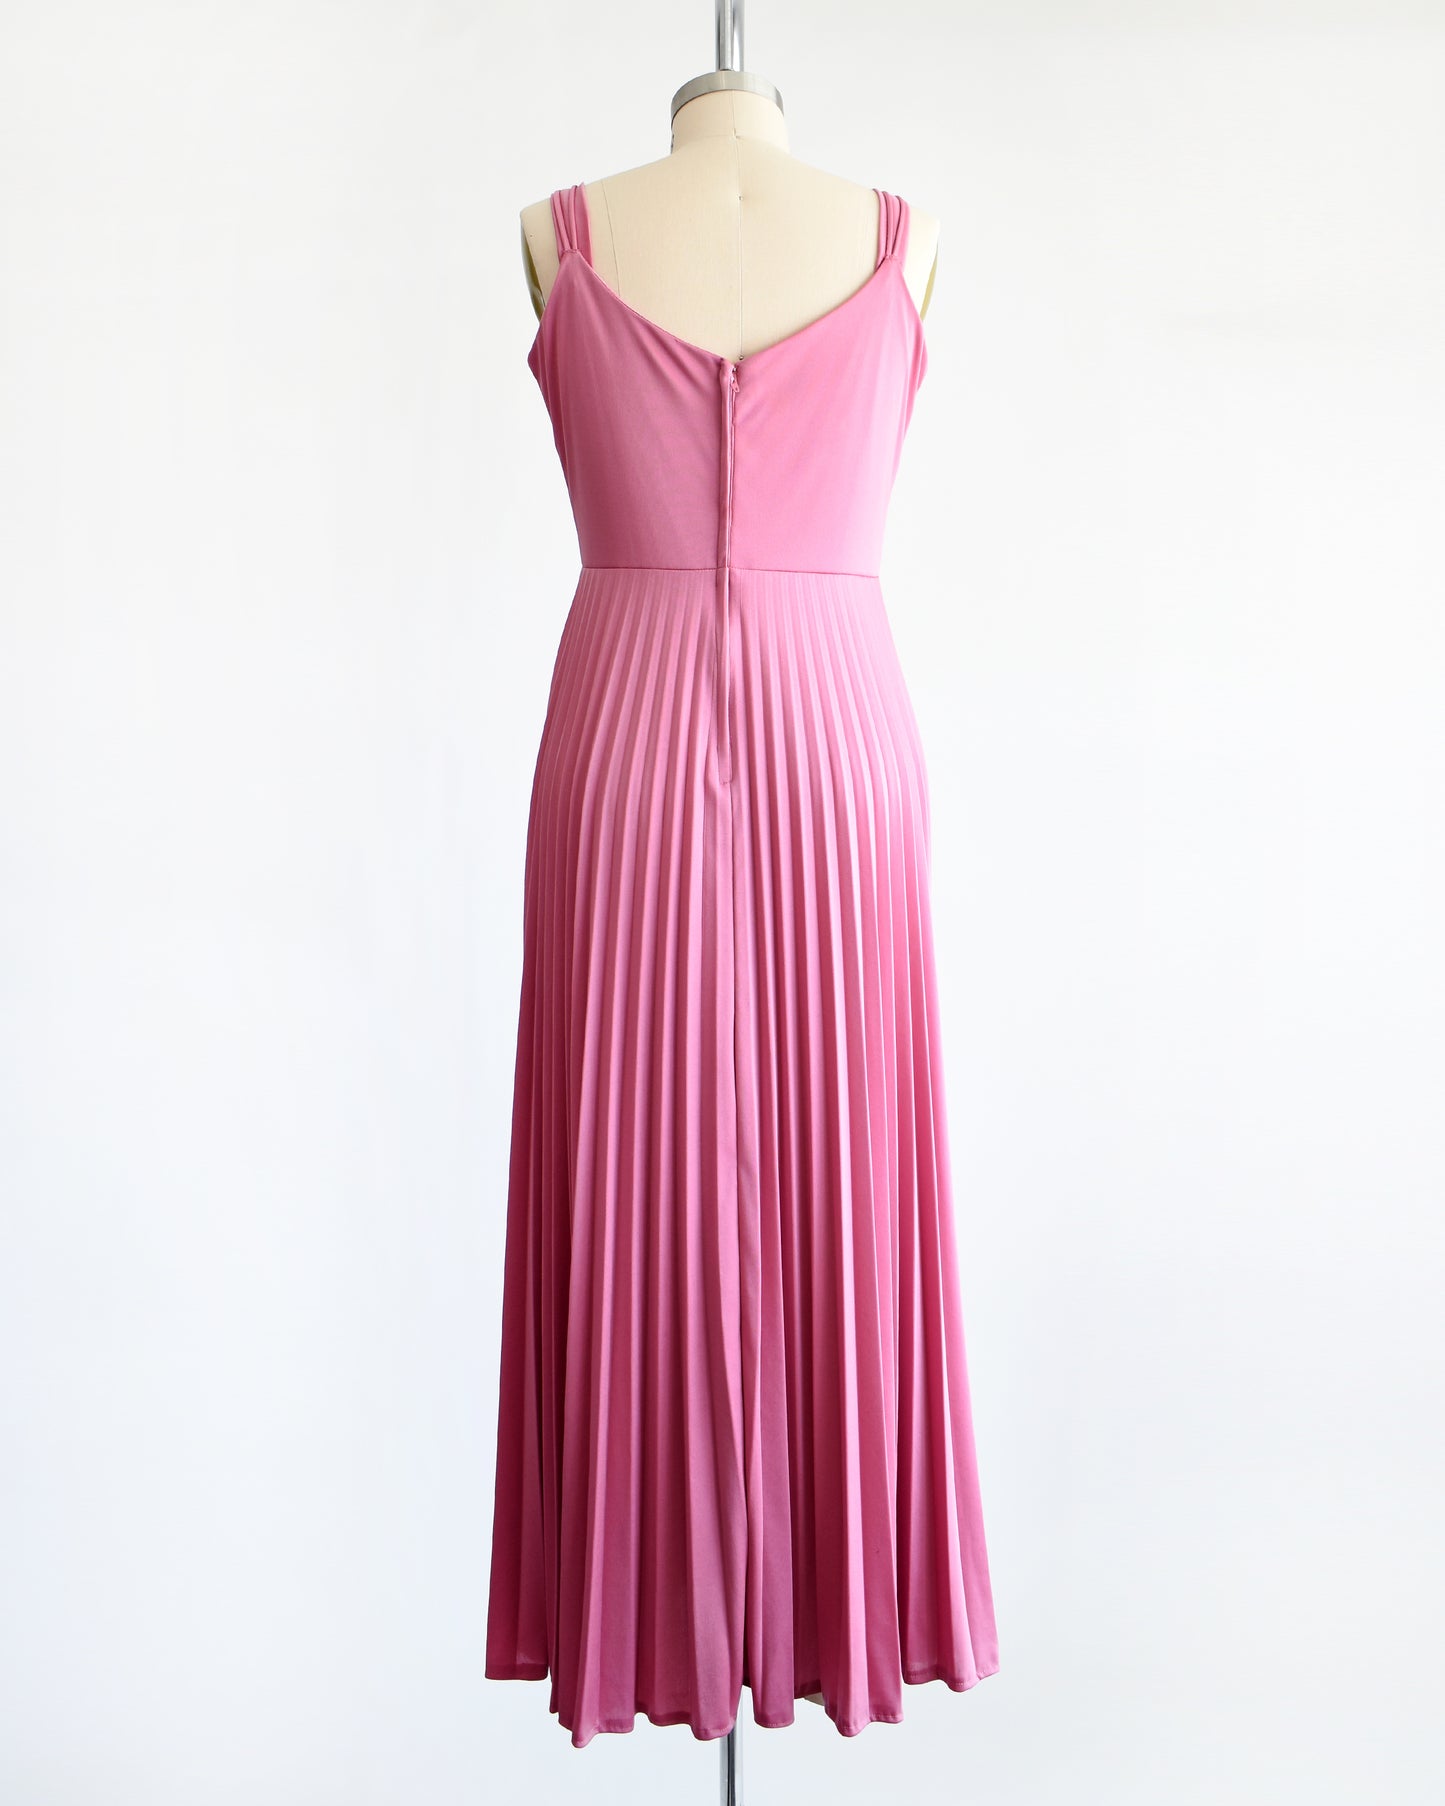 back view of a vintage 1970s dusty pink disco maxi dress that has a long accordion pleated maxi skirt.